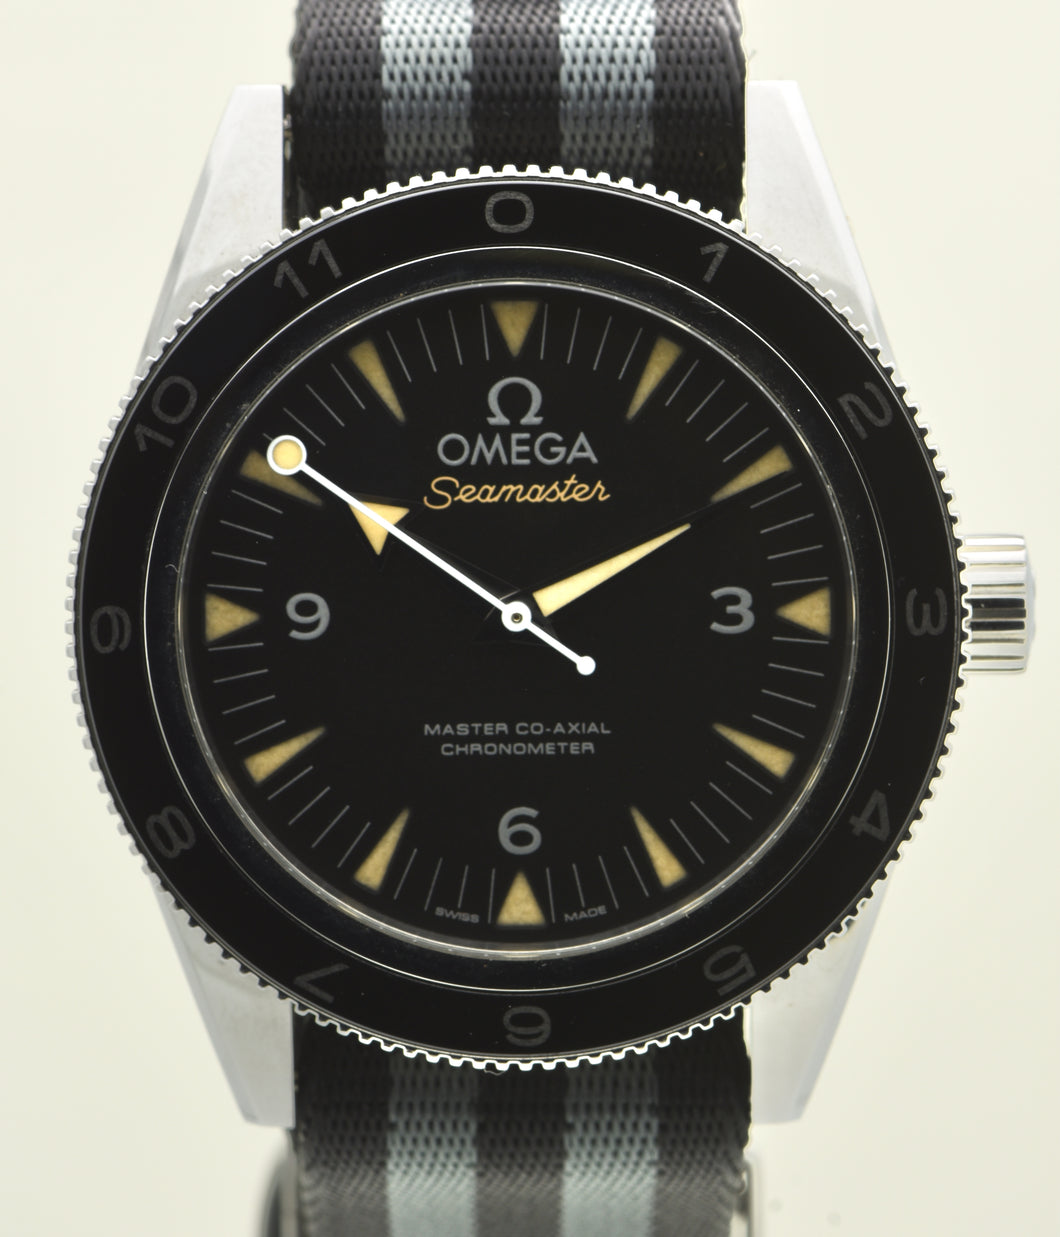 Omega Seamaster 300 Master Co-Axial Chronometer “Spectre” Limited Edition